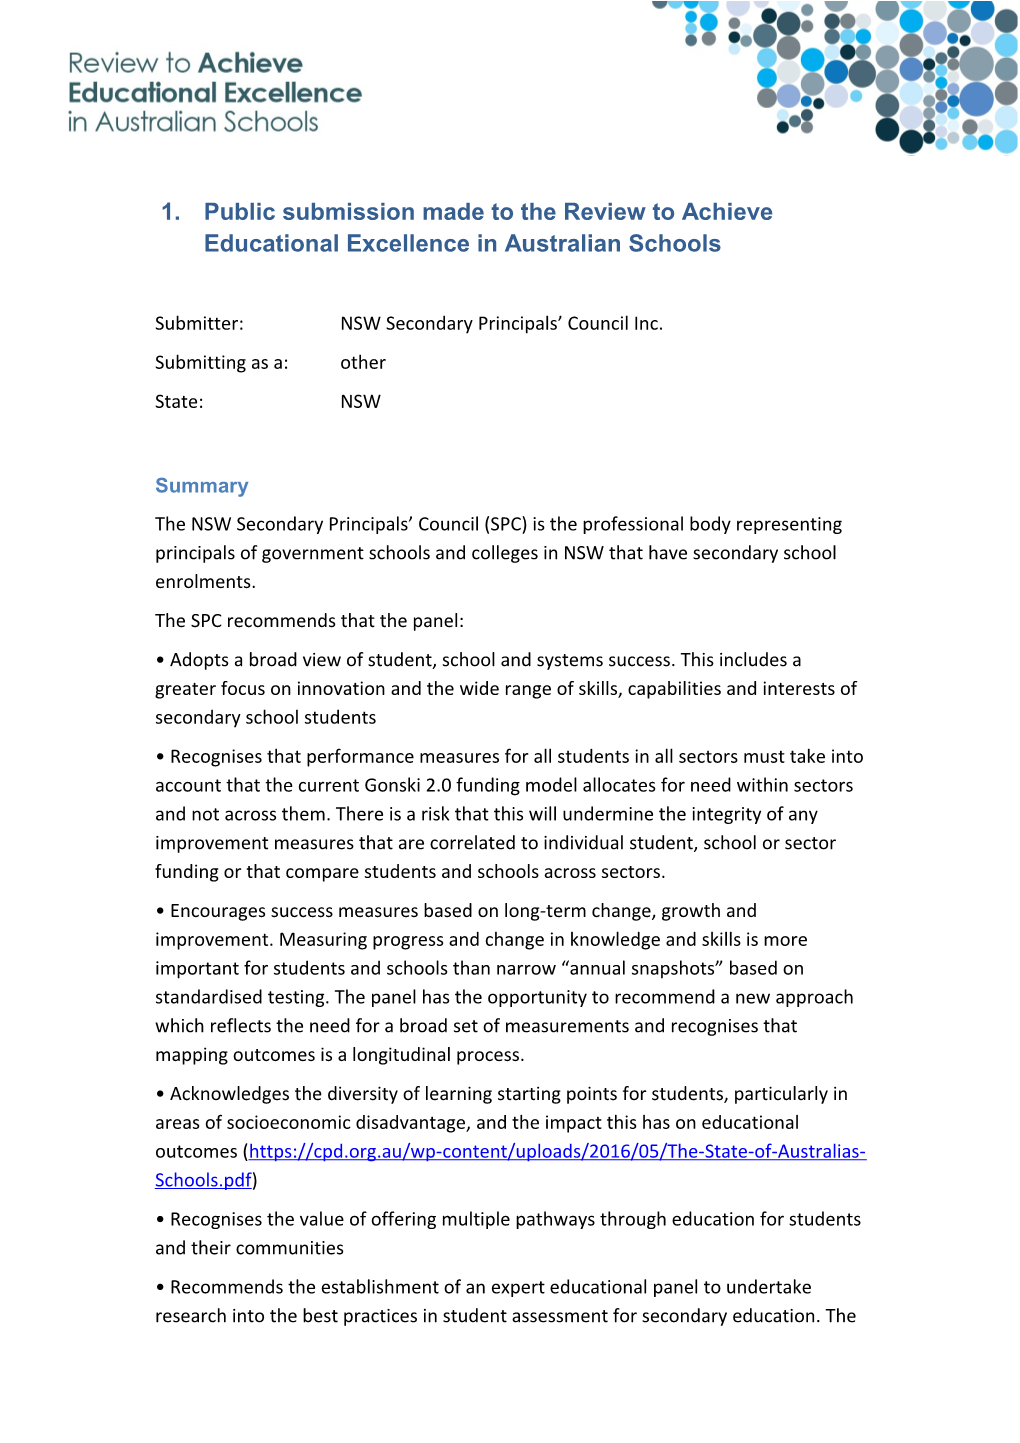 Public Submission Madeto the Review to Achieve Educational Excellence in Australian Schools